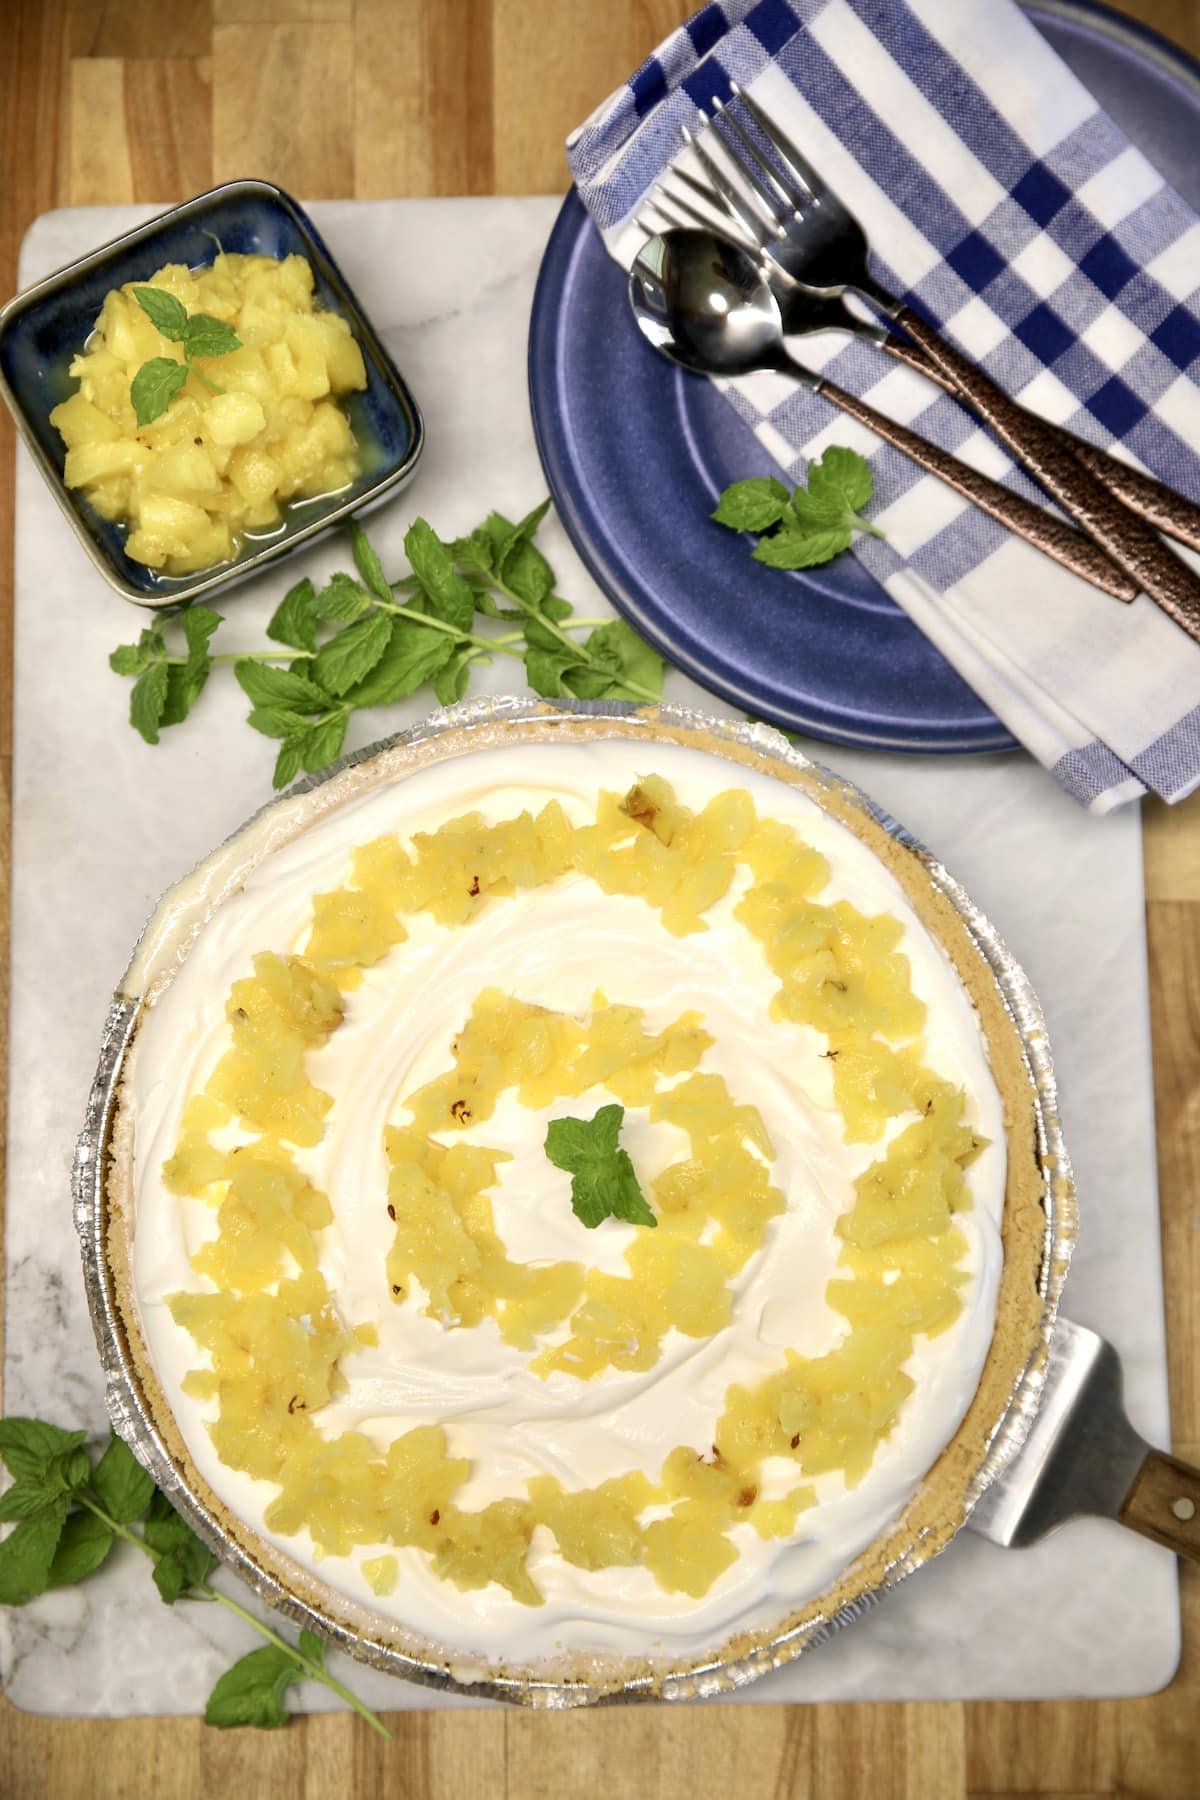 Pineapple Pie with bowl of pineapple, dessert plates, napkin, forks.